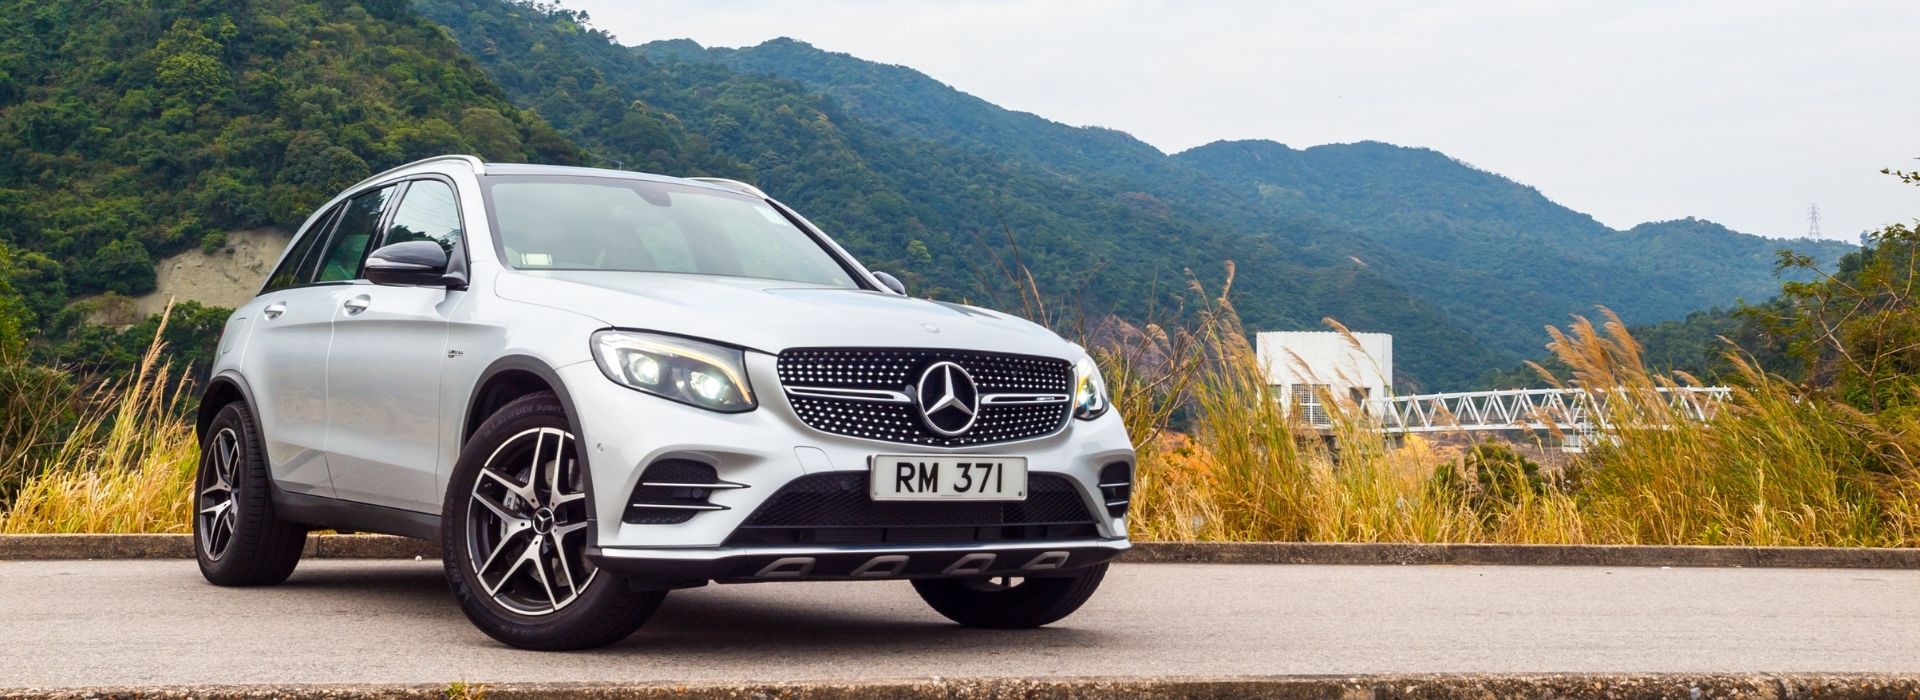 Five things you need to know about the Mercedes Benz GLC